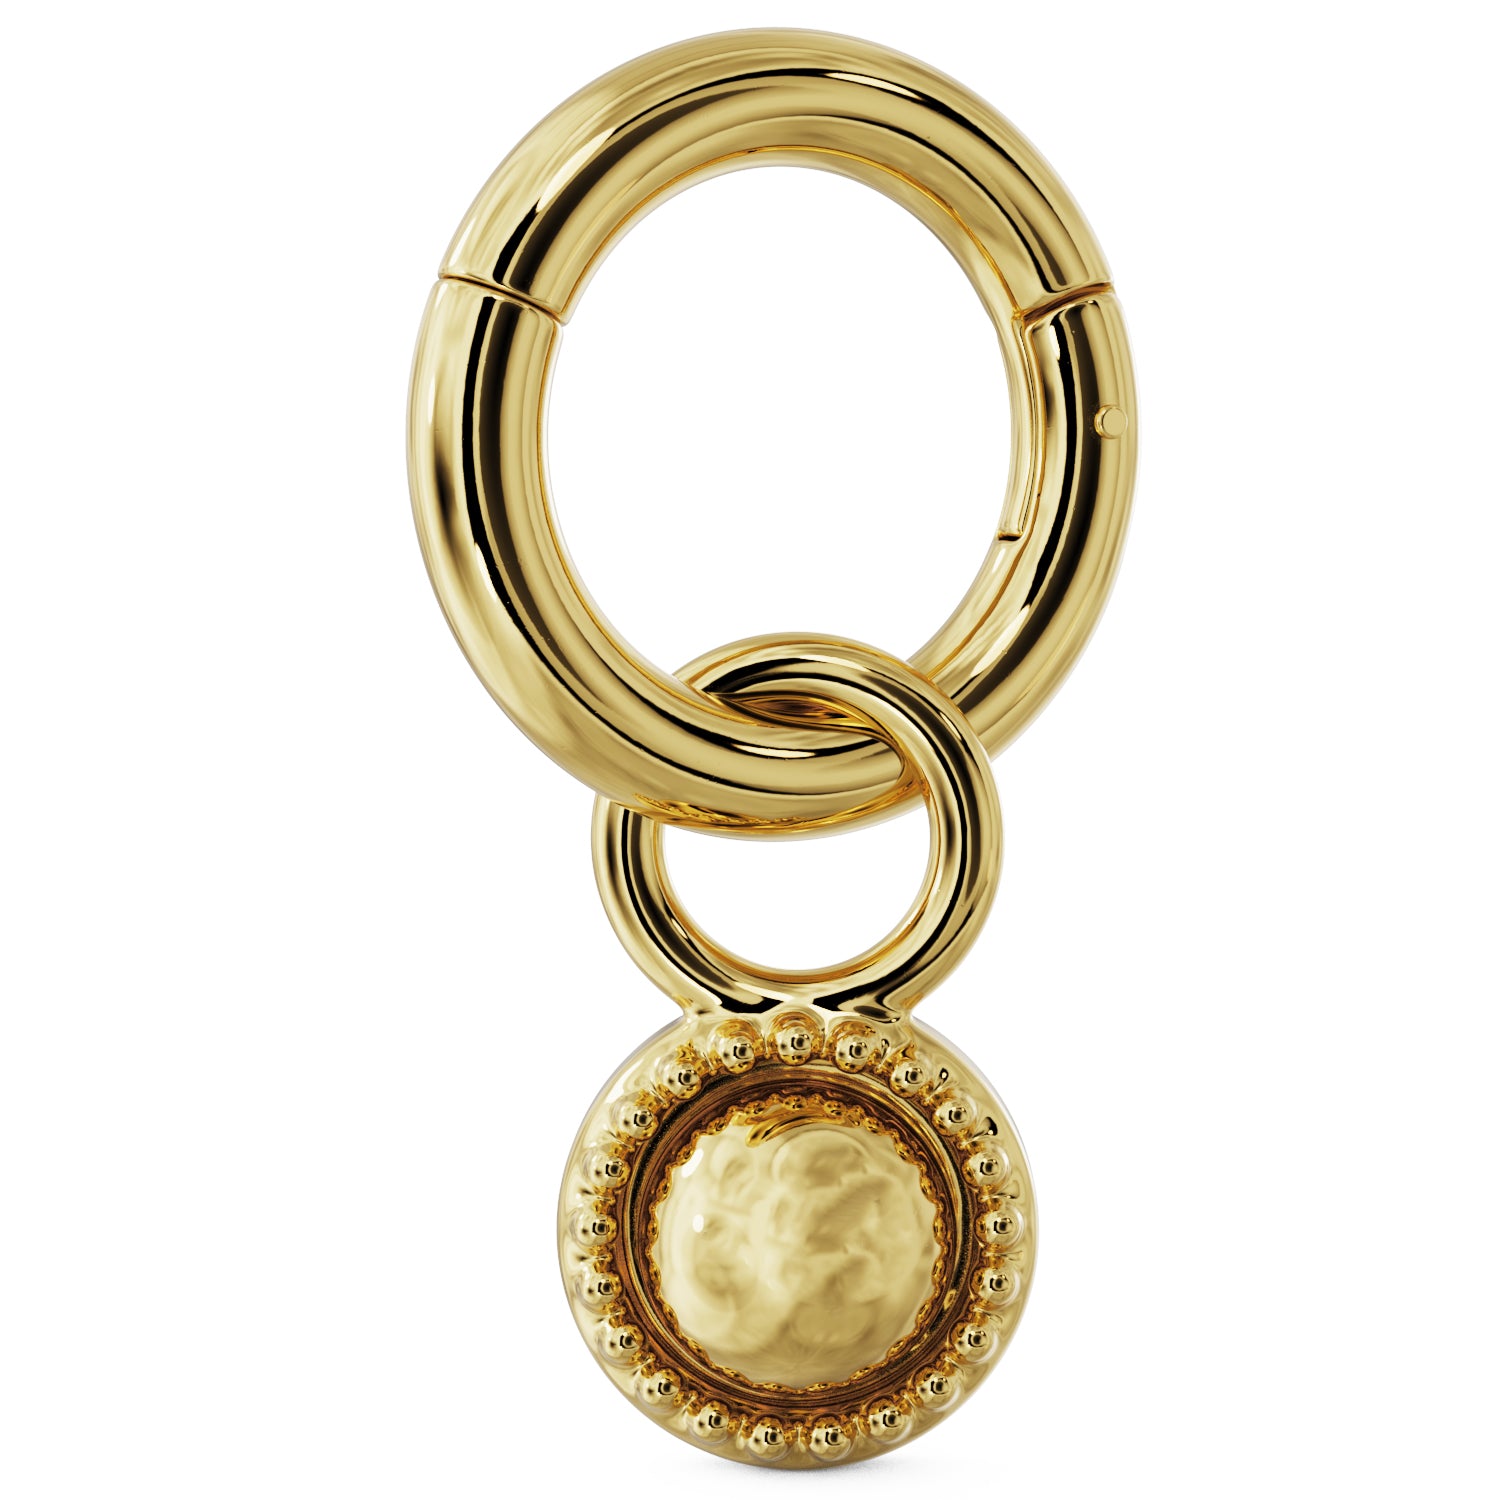 Clicker Ring & 14k Gold - Milgrain Charm Accessory for Piercing Jewelry